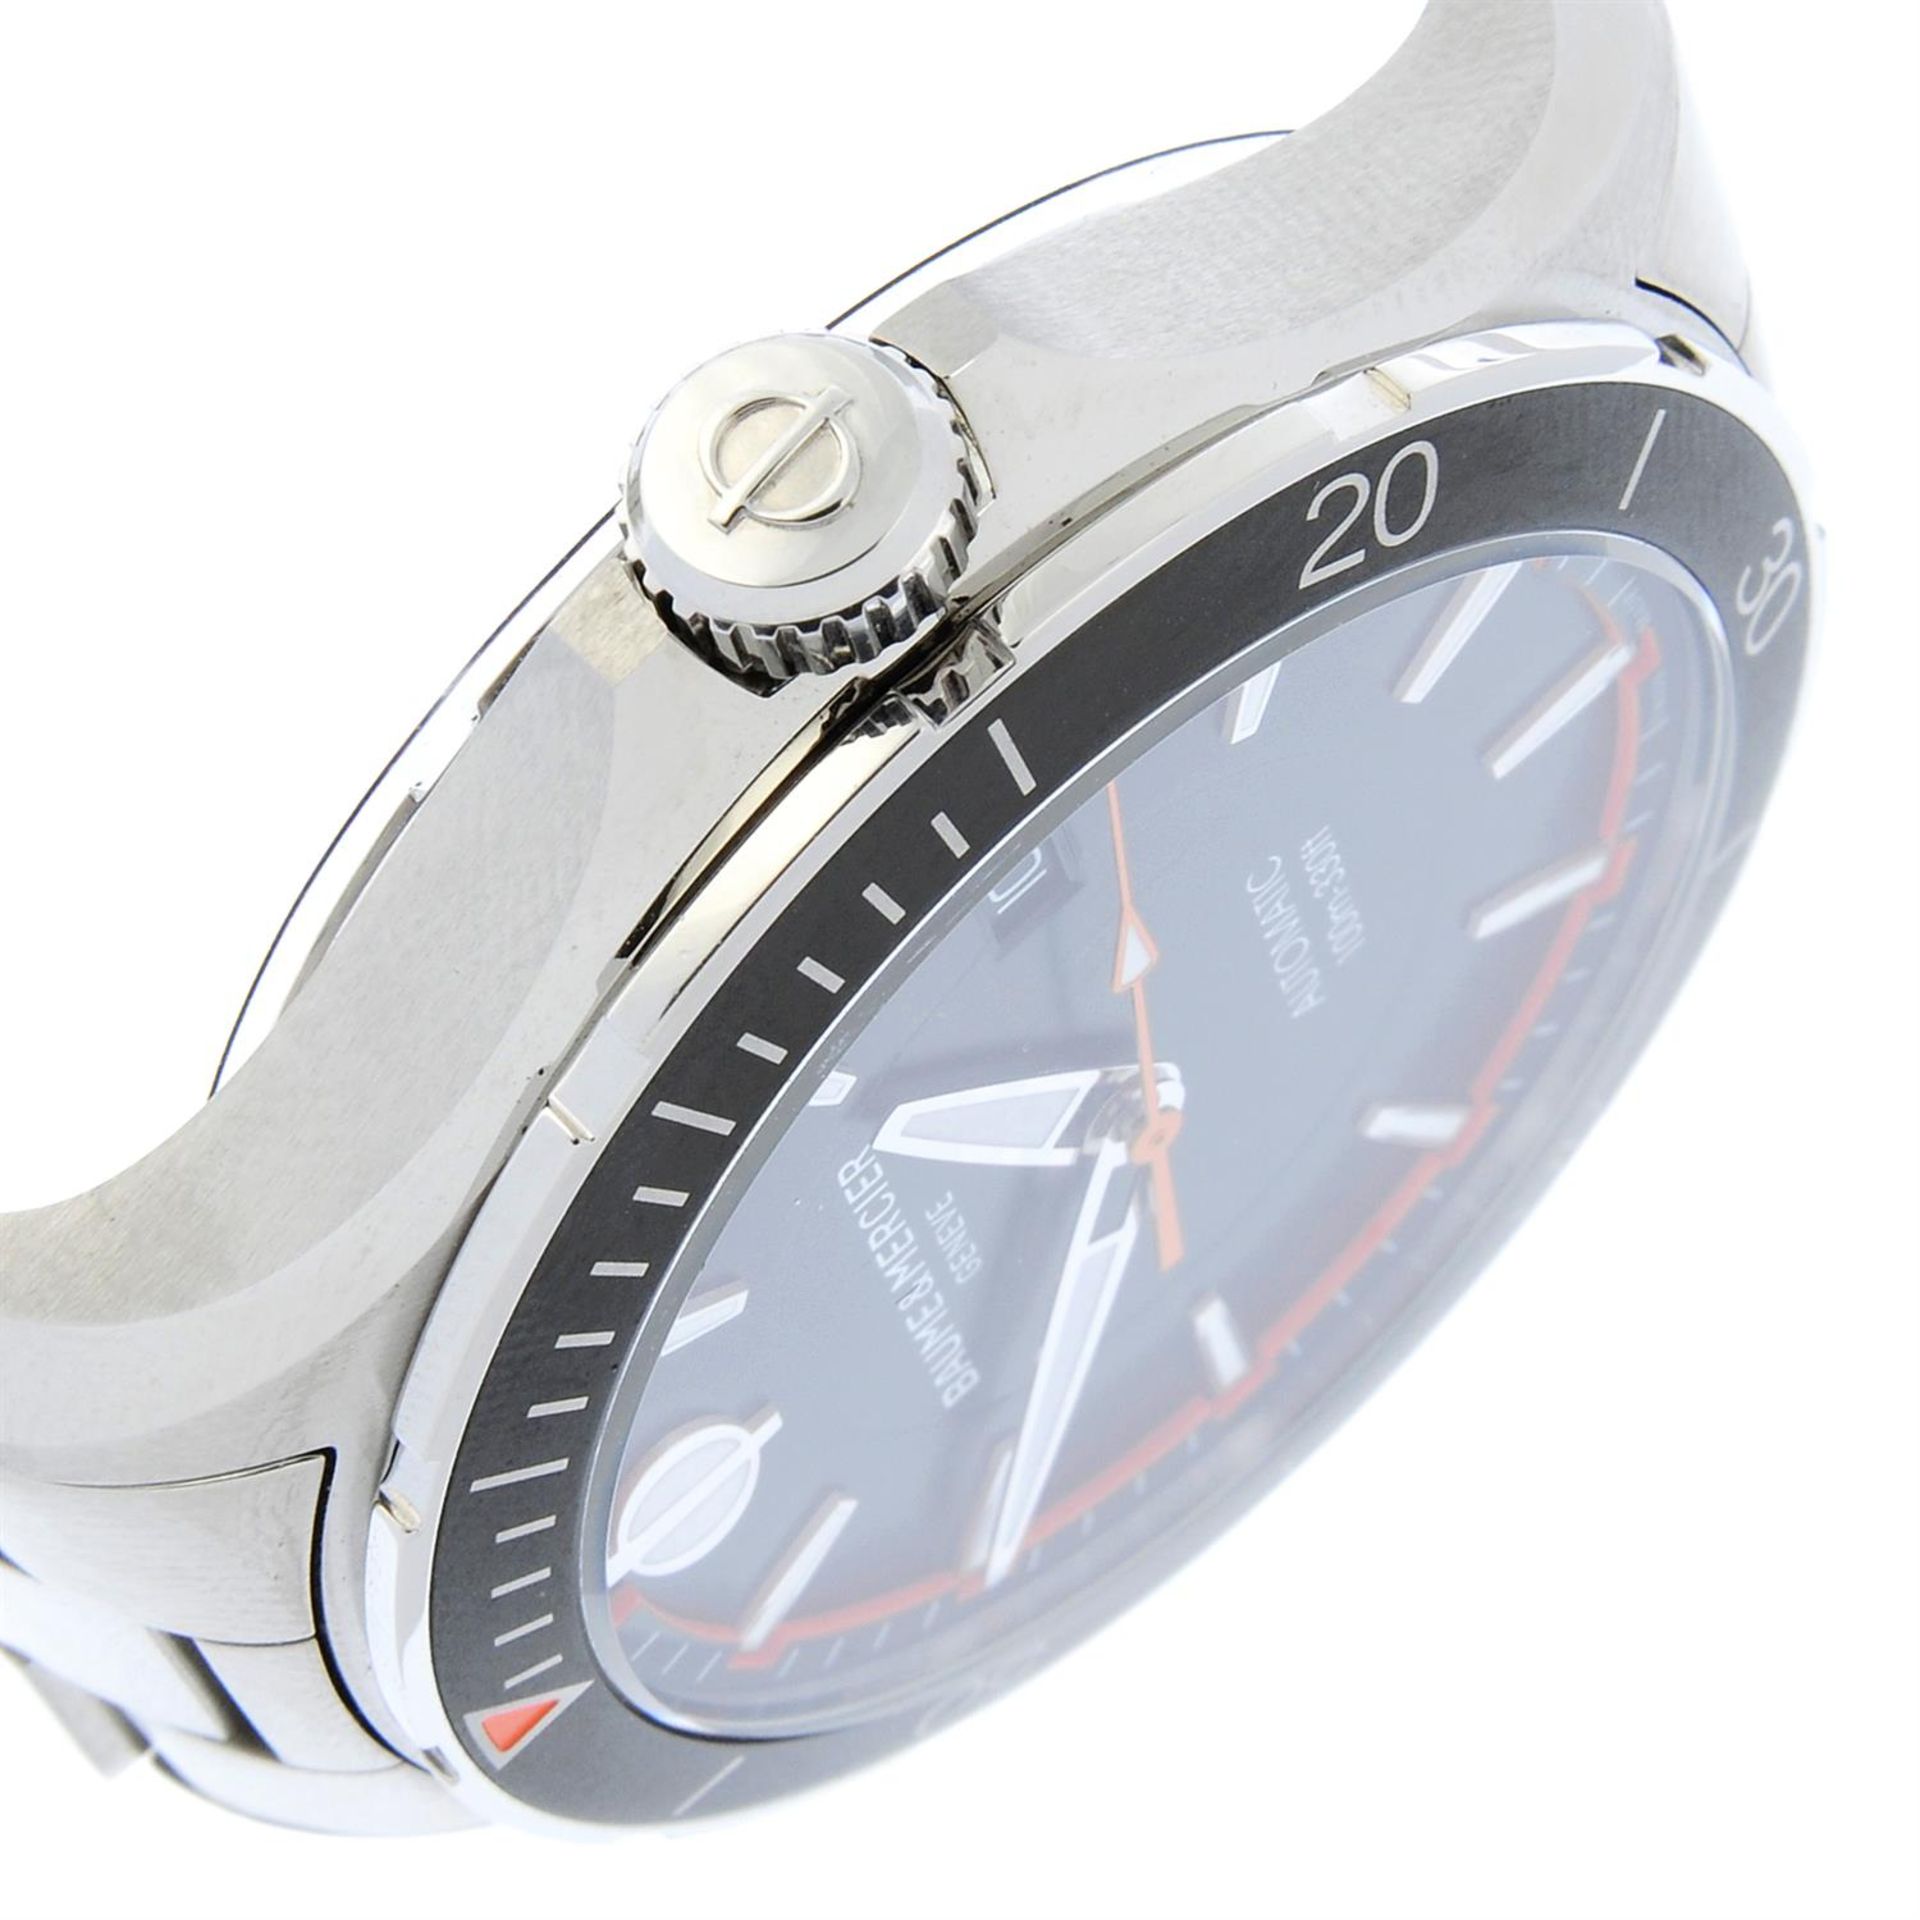 BAUME & MERCIER - a stainless steel Clifton bracelet watch, 41mm. - Image 3 of 6